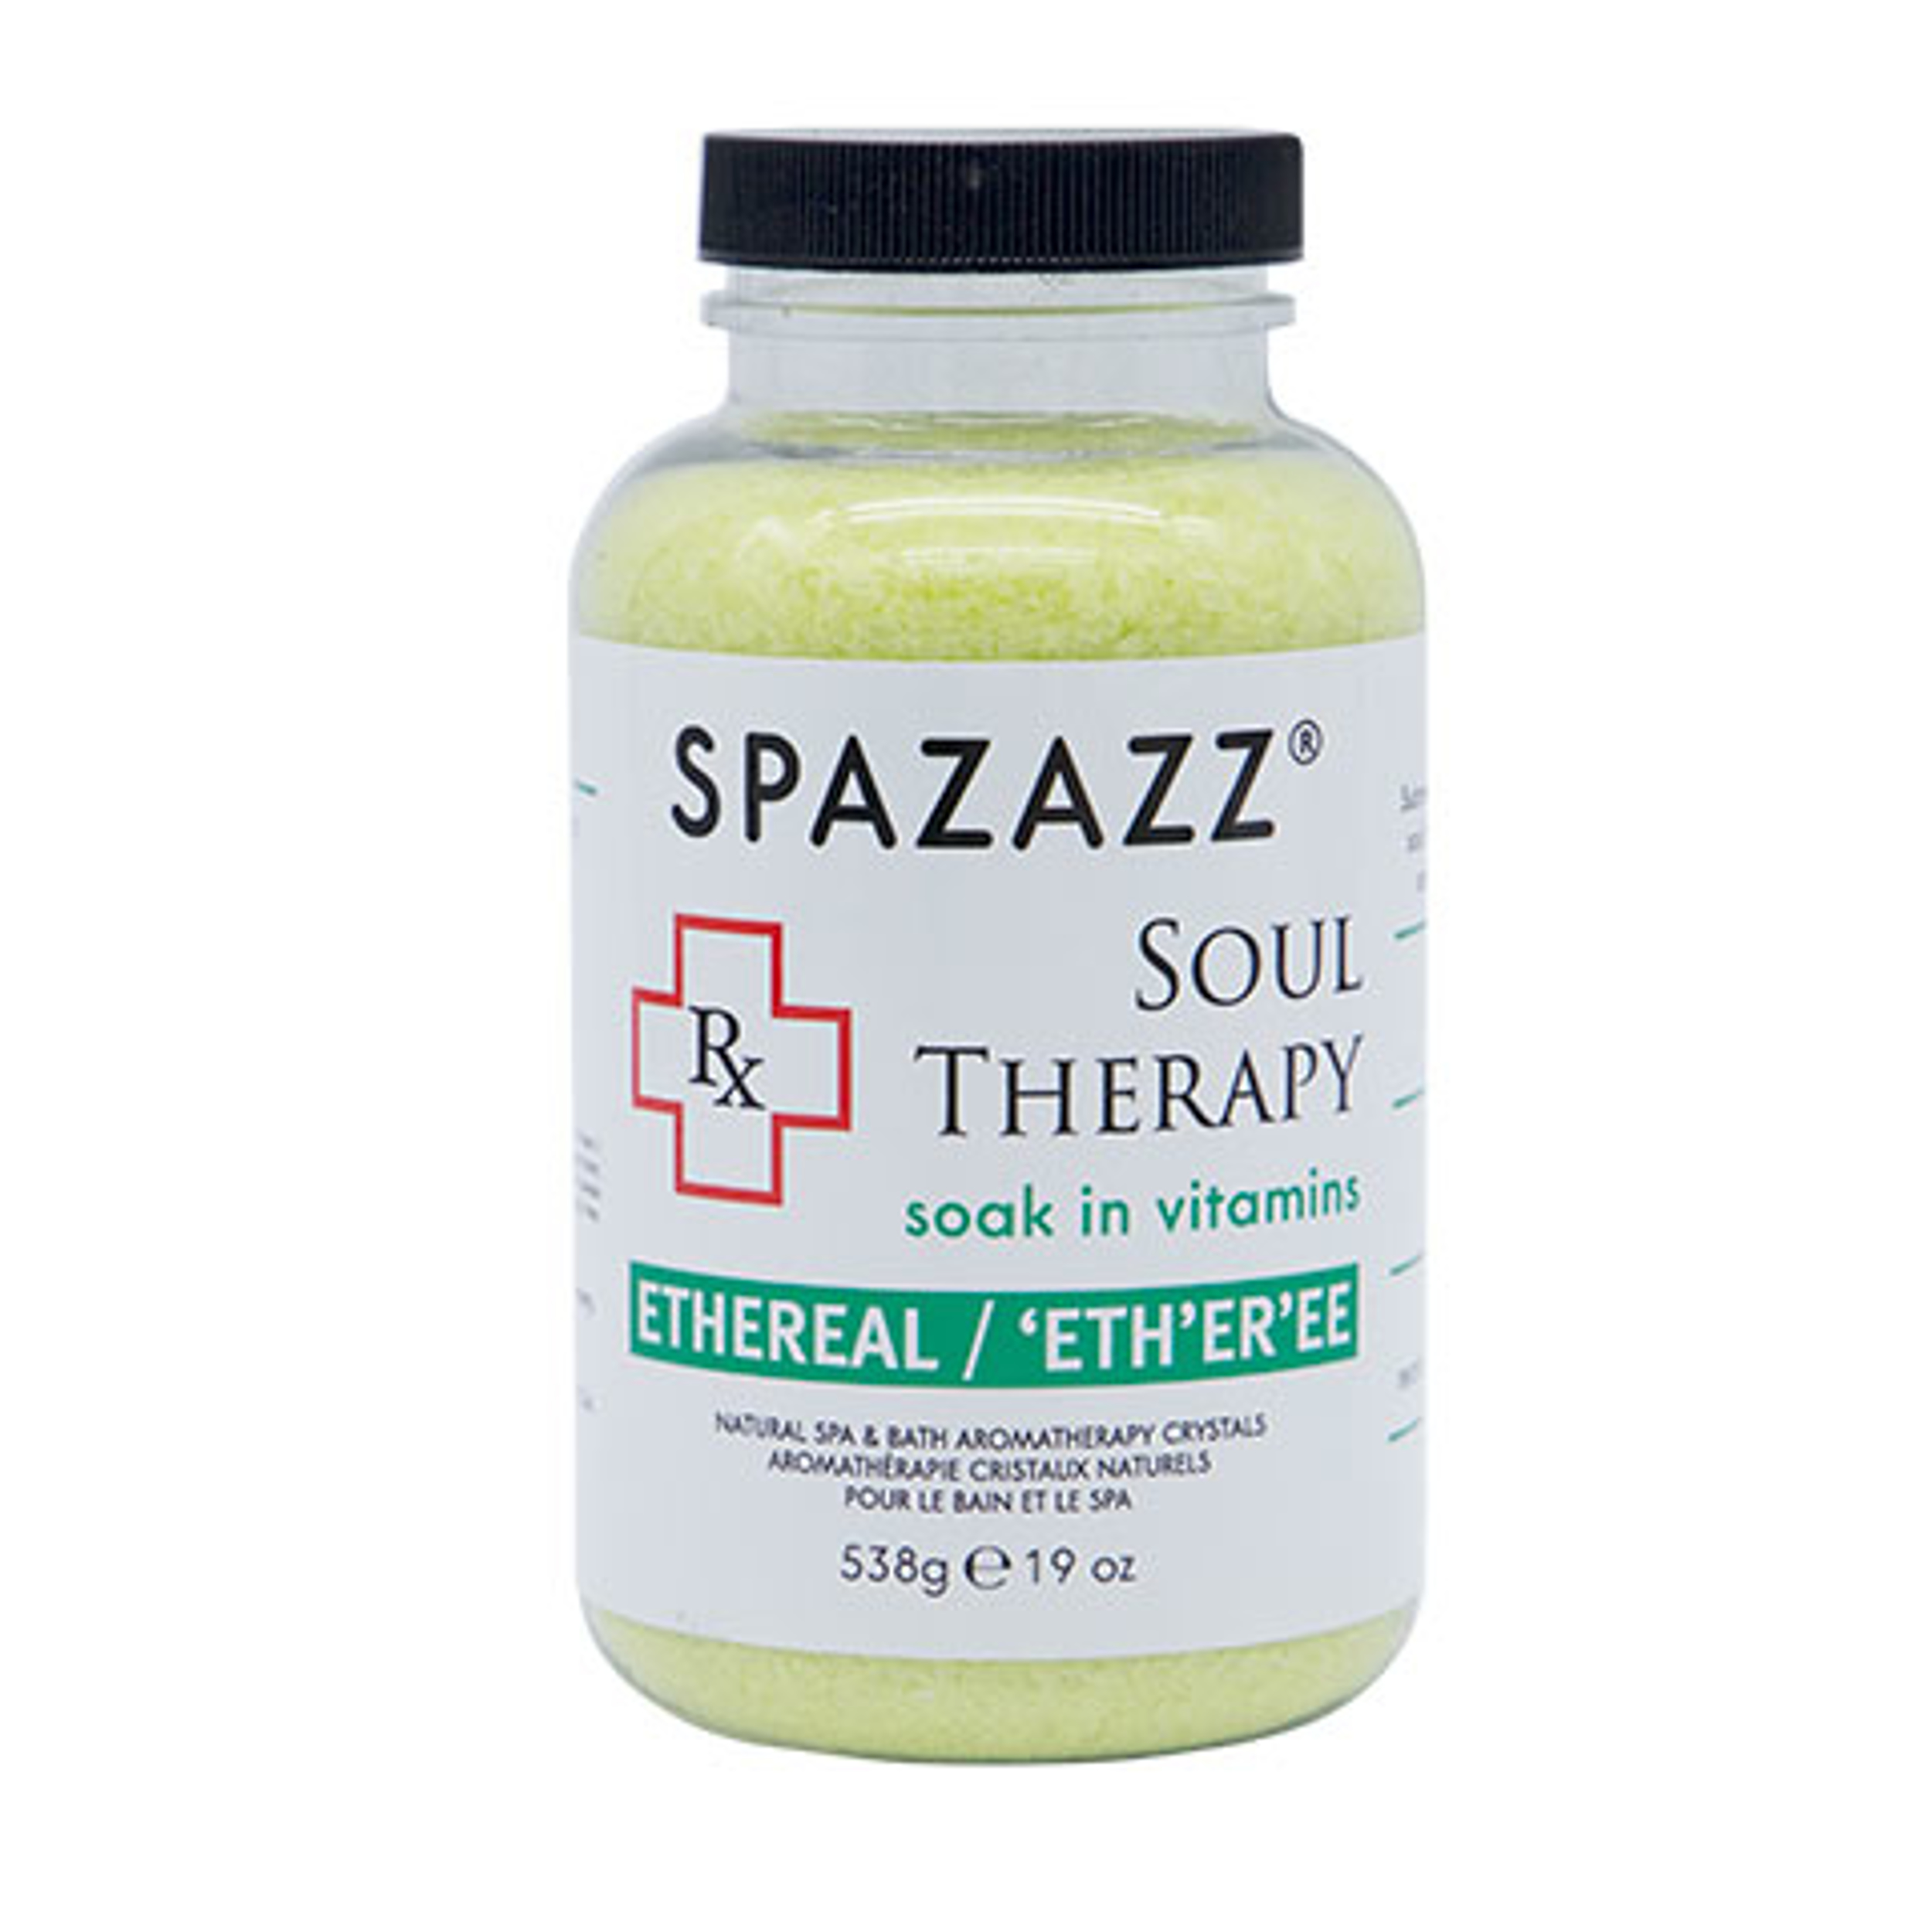 Essentials Spazazz Rx Soul Therapy